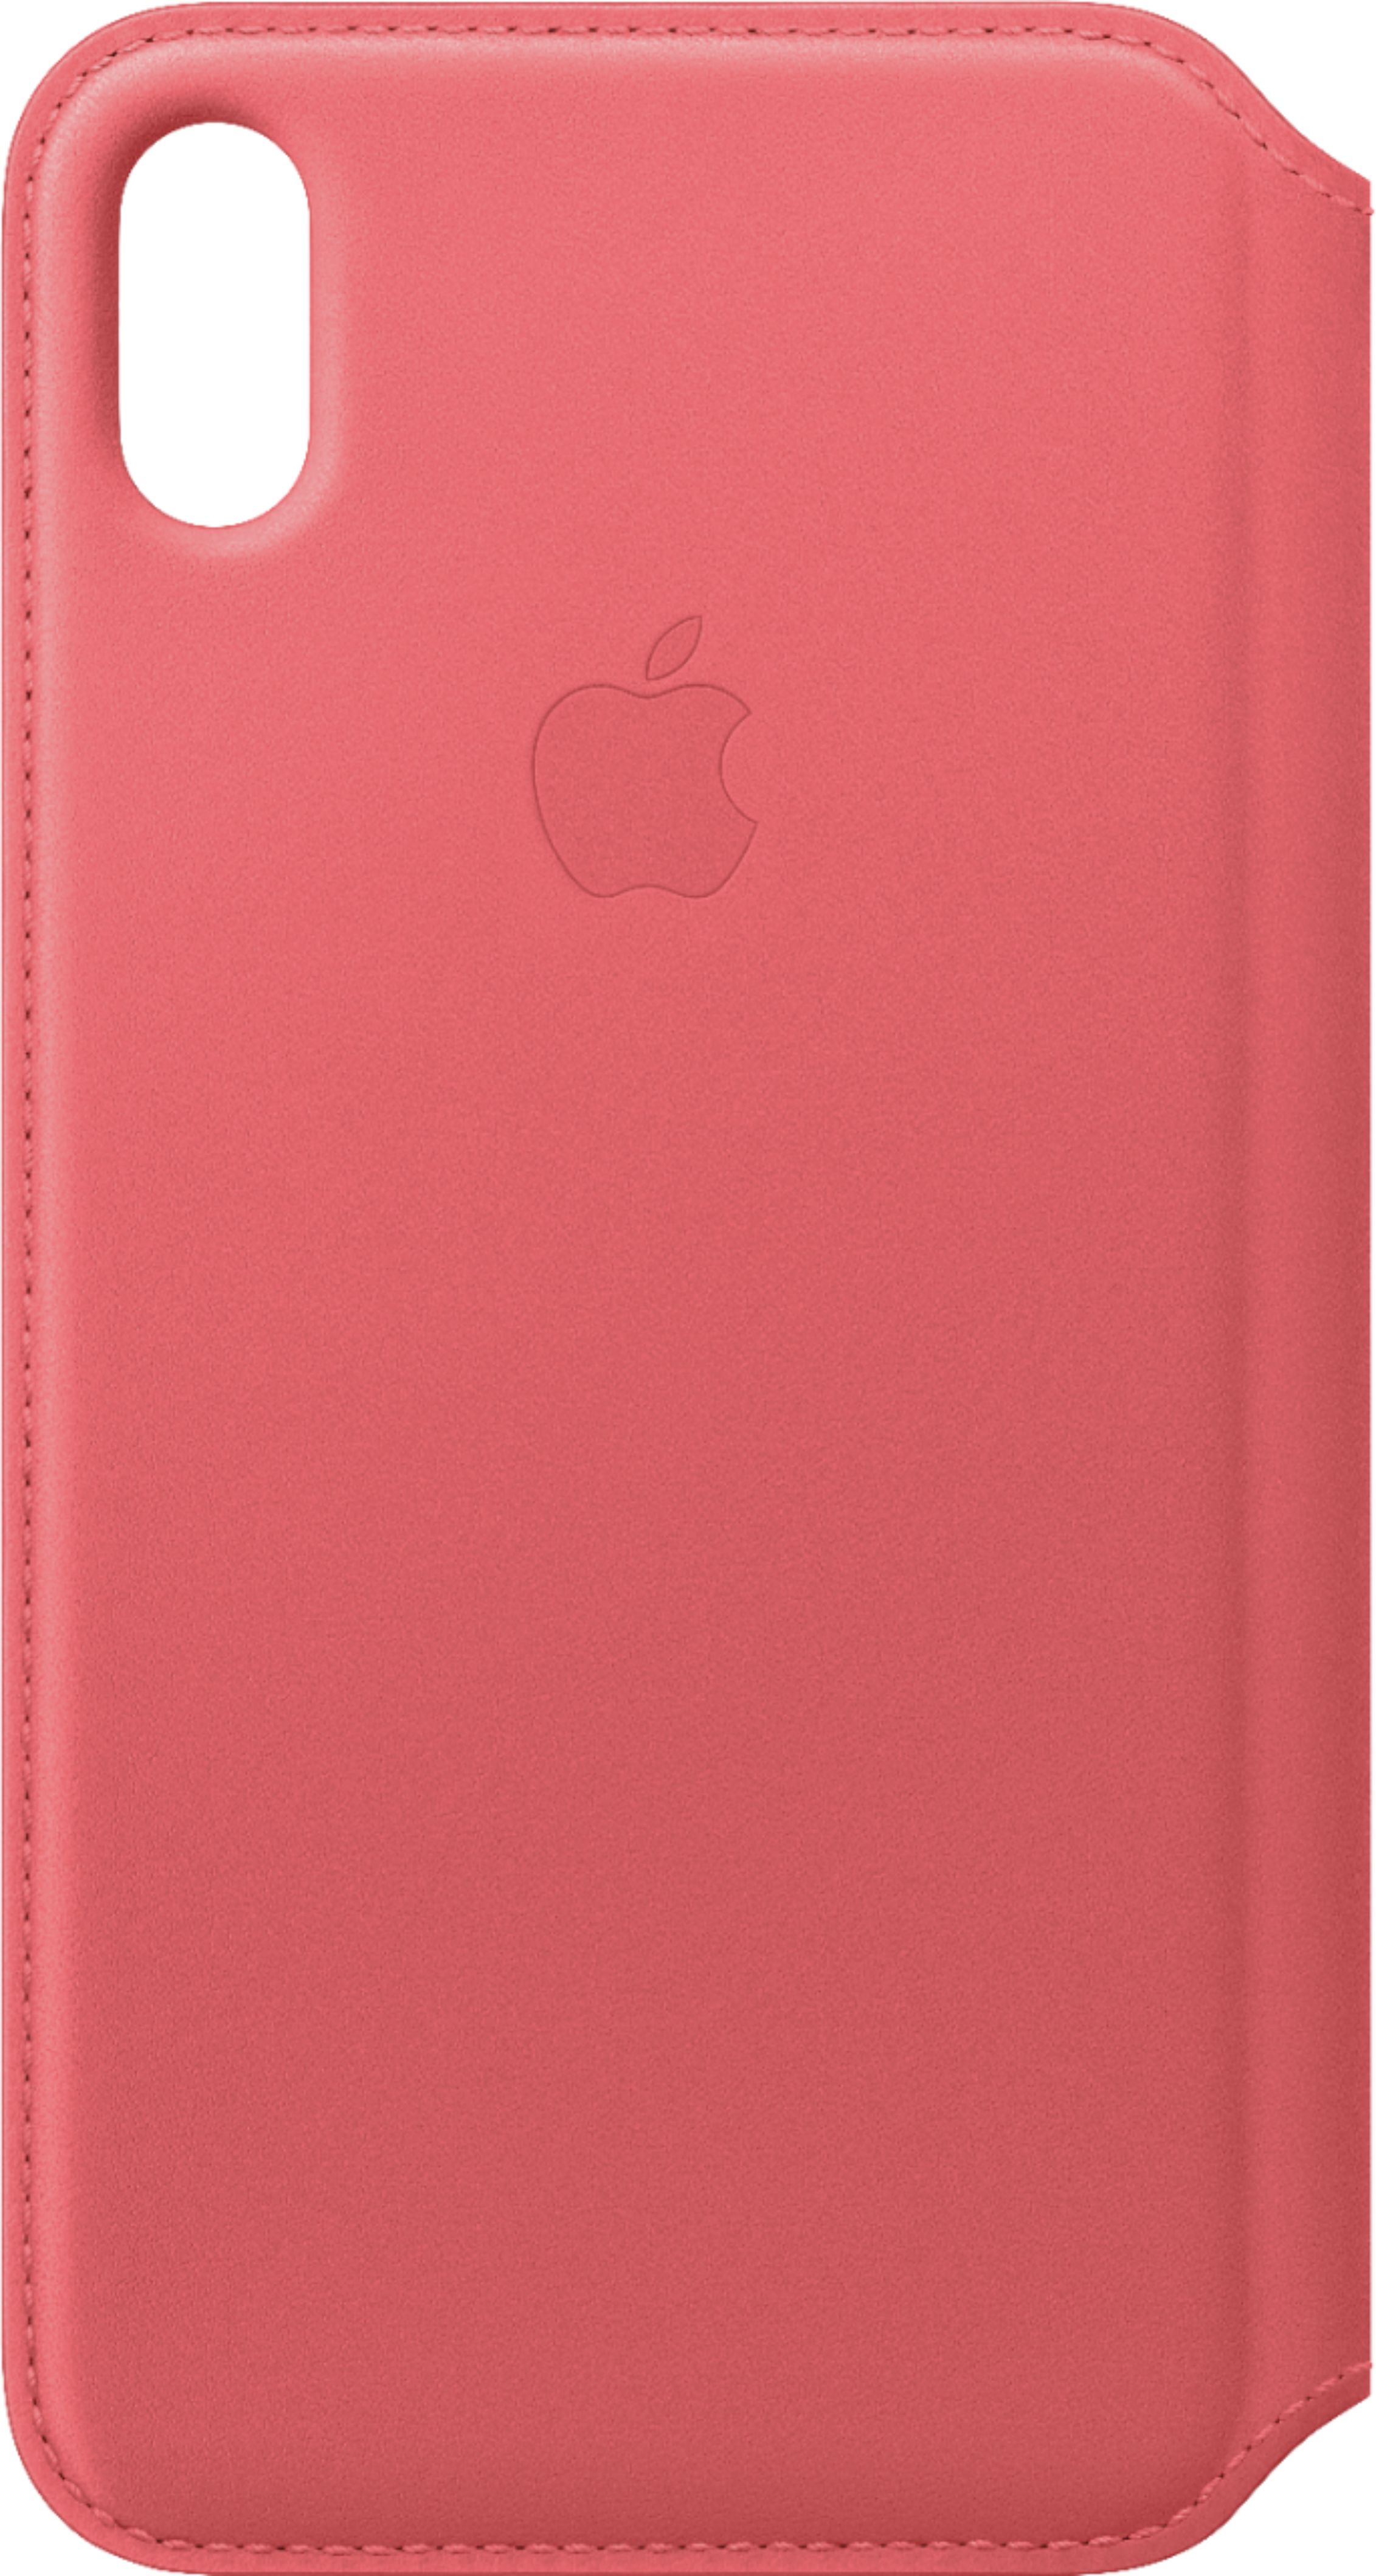 Apple Iphone Xs Max Leather Folio Peony Pink Mrx62zm A Best Buy